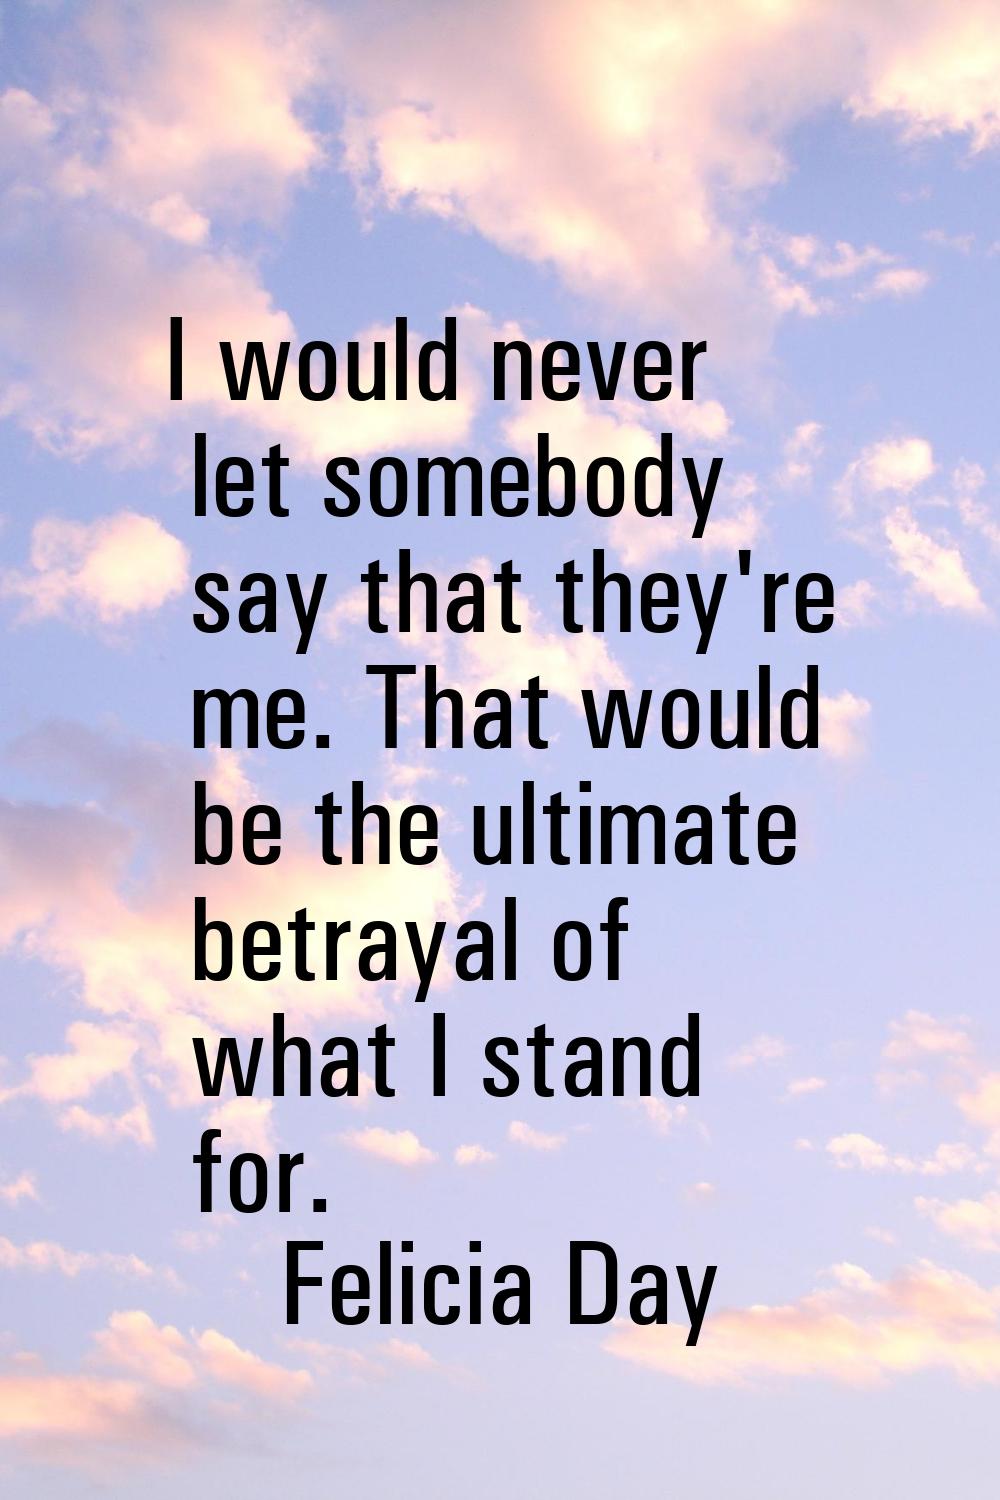 I would never let somebody say that they're me. That would be the ultimate betrayal of what I stand